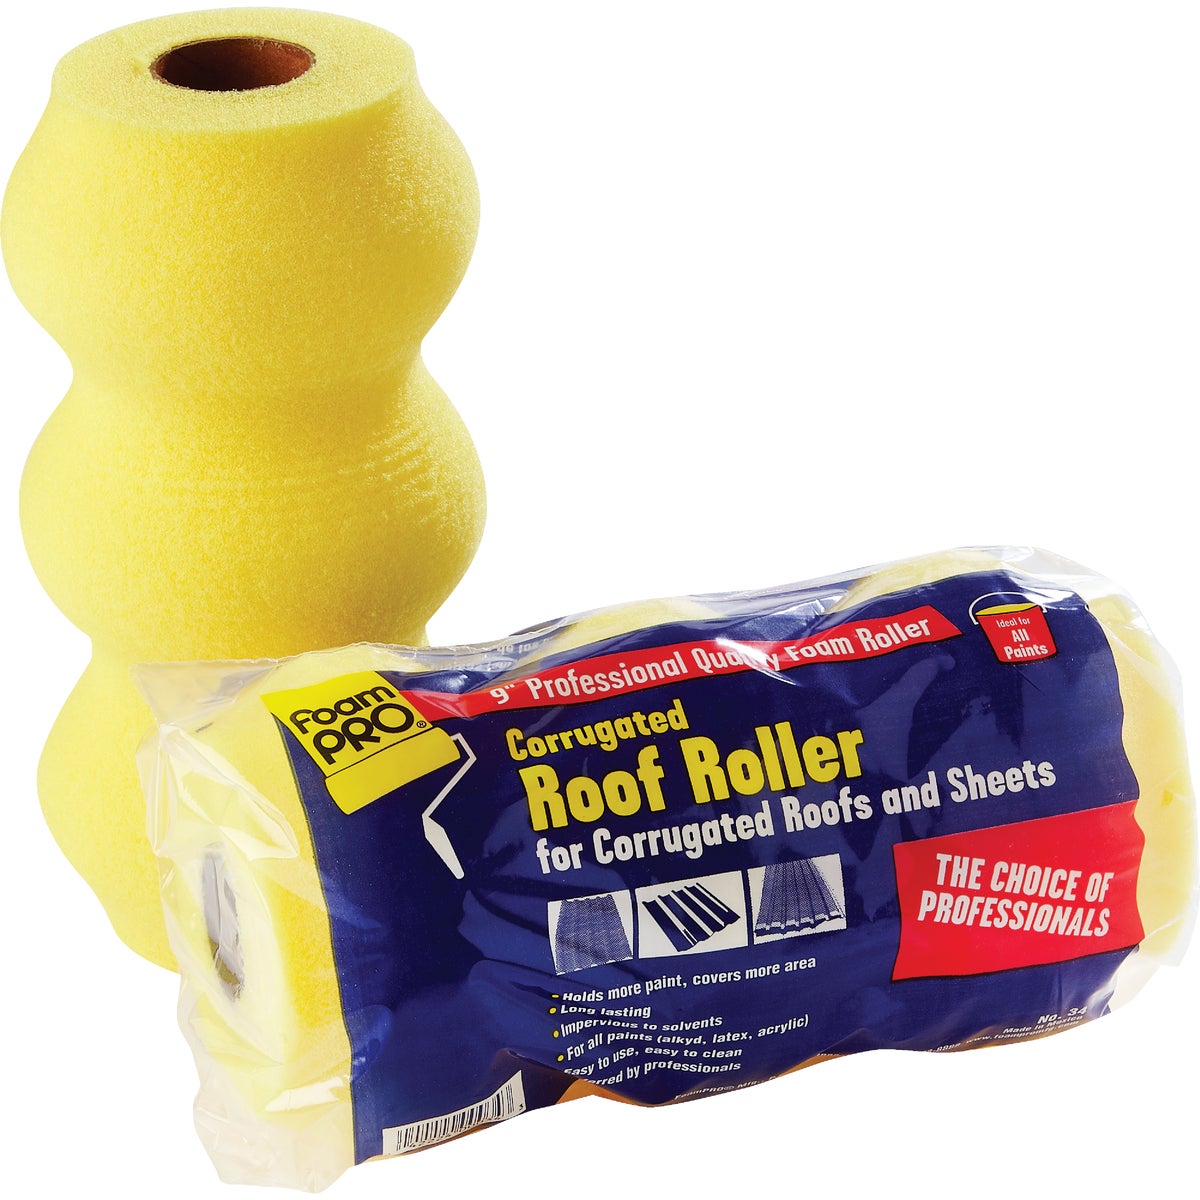 Item 772128, Professional corrugated roof roller is perfect for use on metal roofs and 